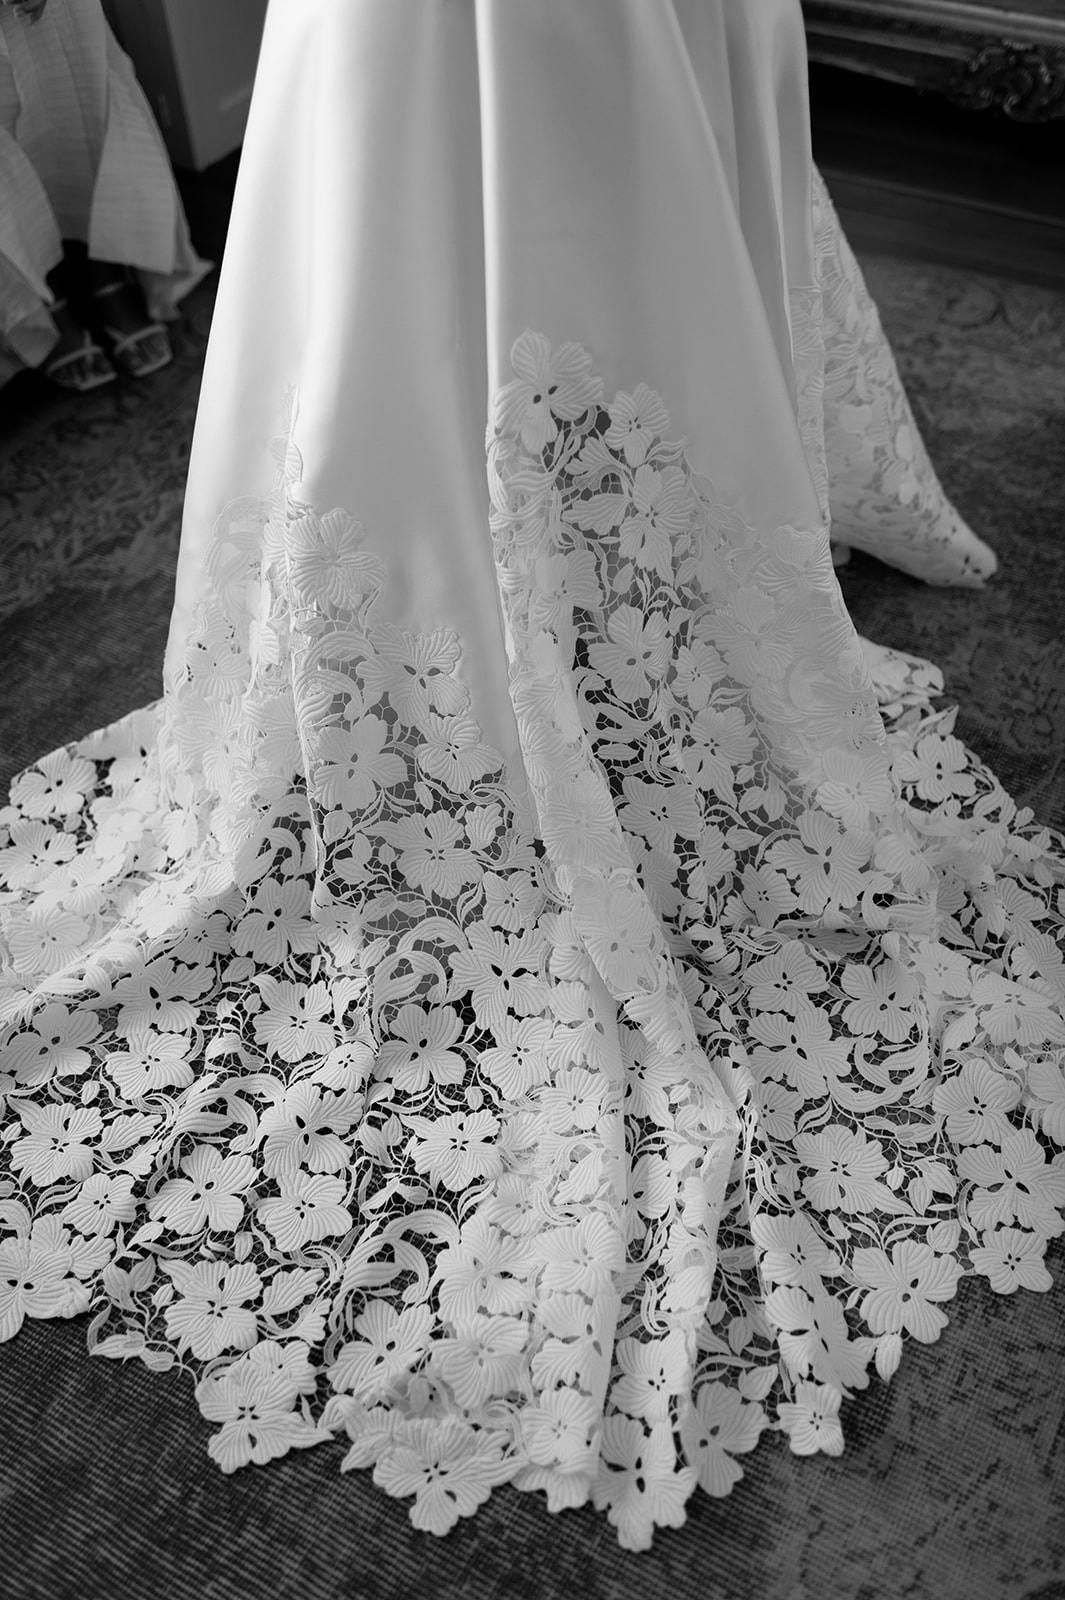 A close-up black and white image of the lower part of a wedding dress featuring intricate lace details with floral patterns extending from the hem. The dress is elegantly pooled on the floor, highlighting the delicate craftsmanship of the lacework.